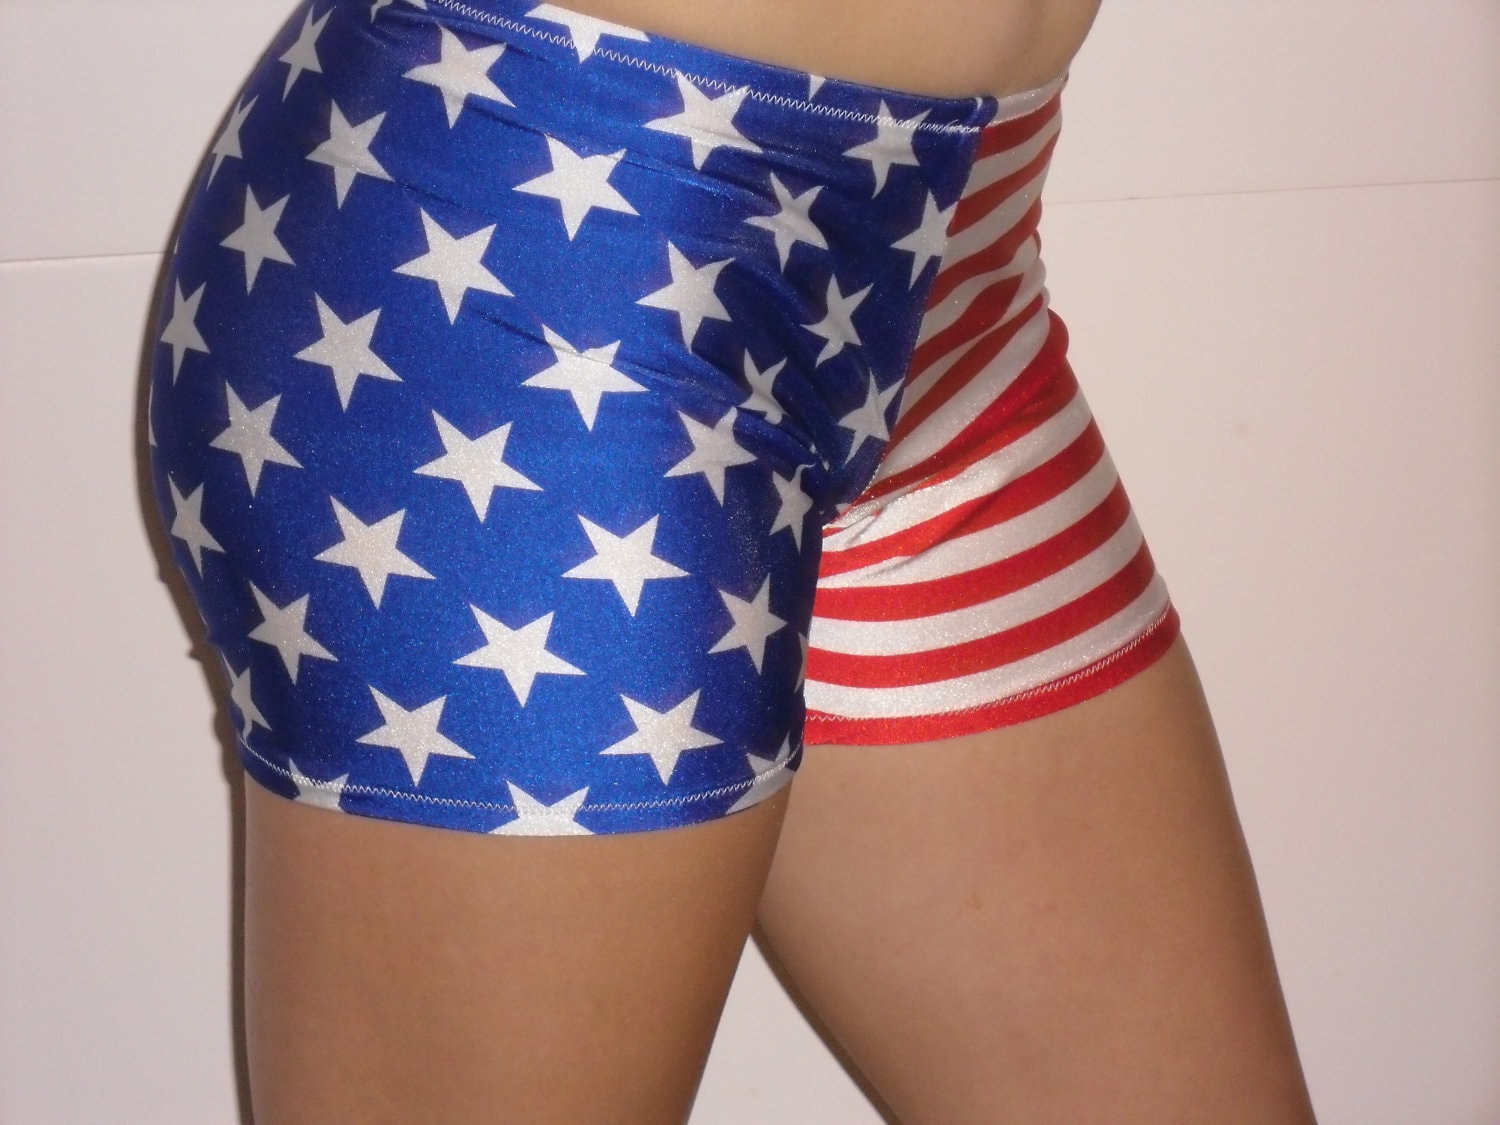 Spandex shorts in red white and blue stars and stripes